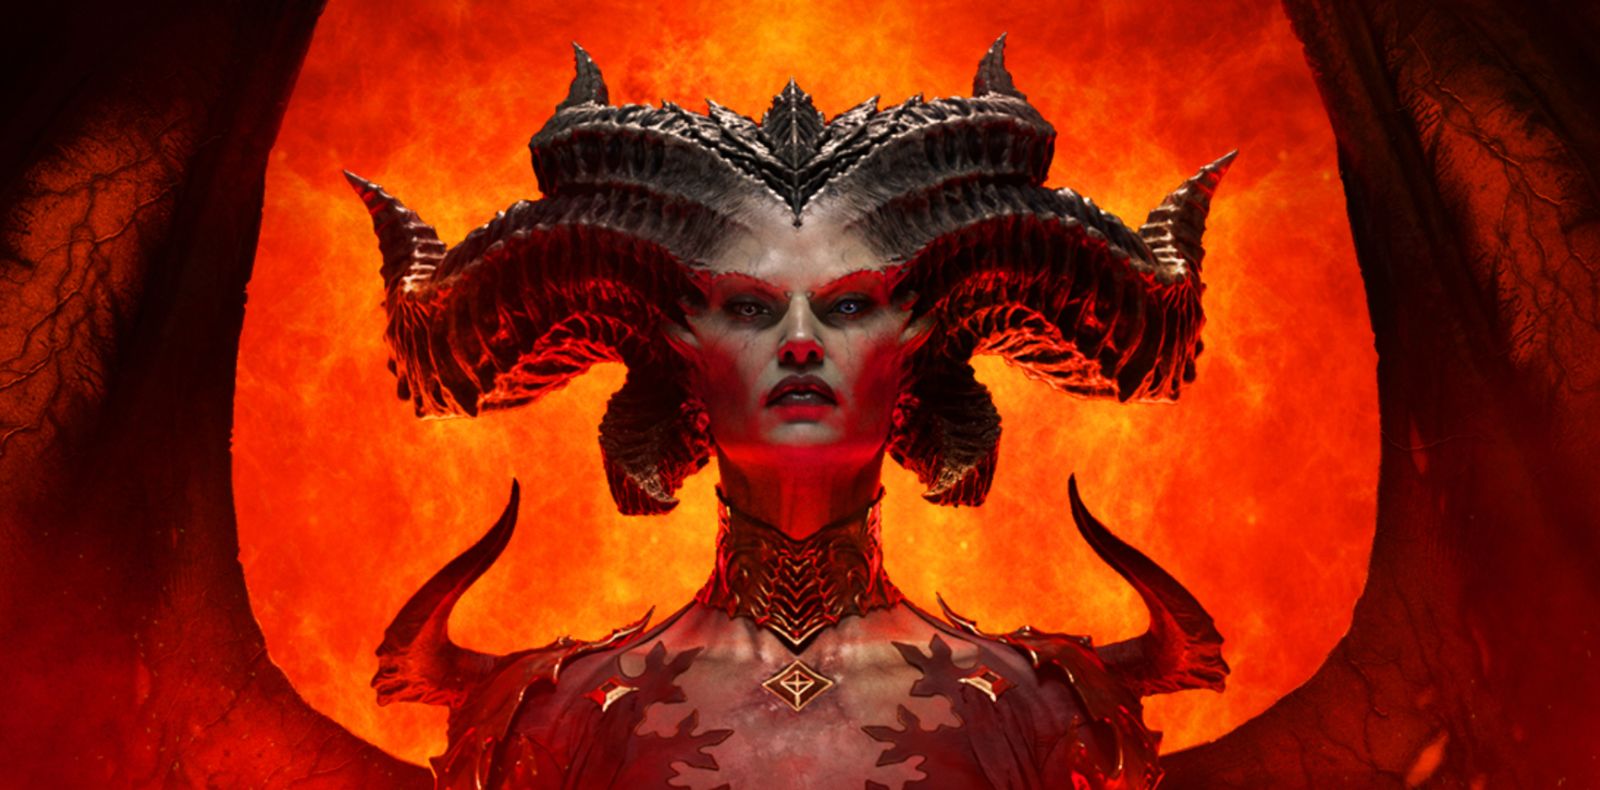 Image of a demonic lady with wings and horns in front of a fiery background.